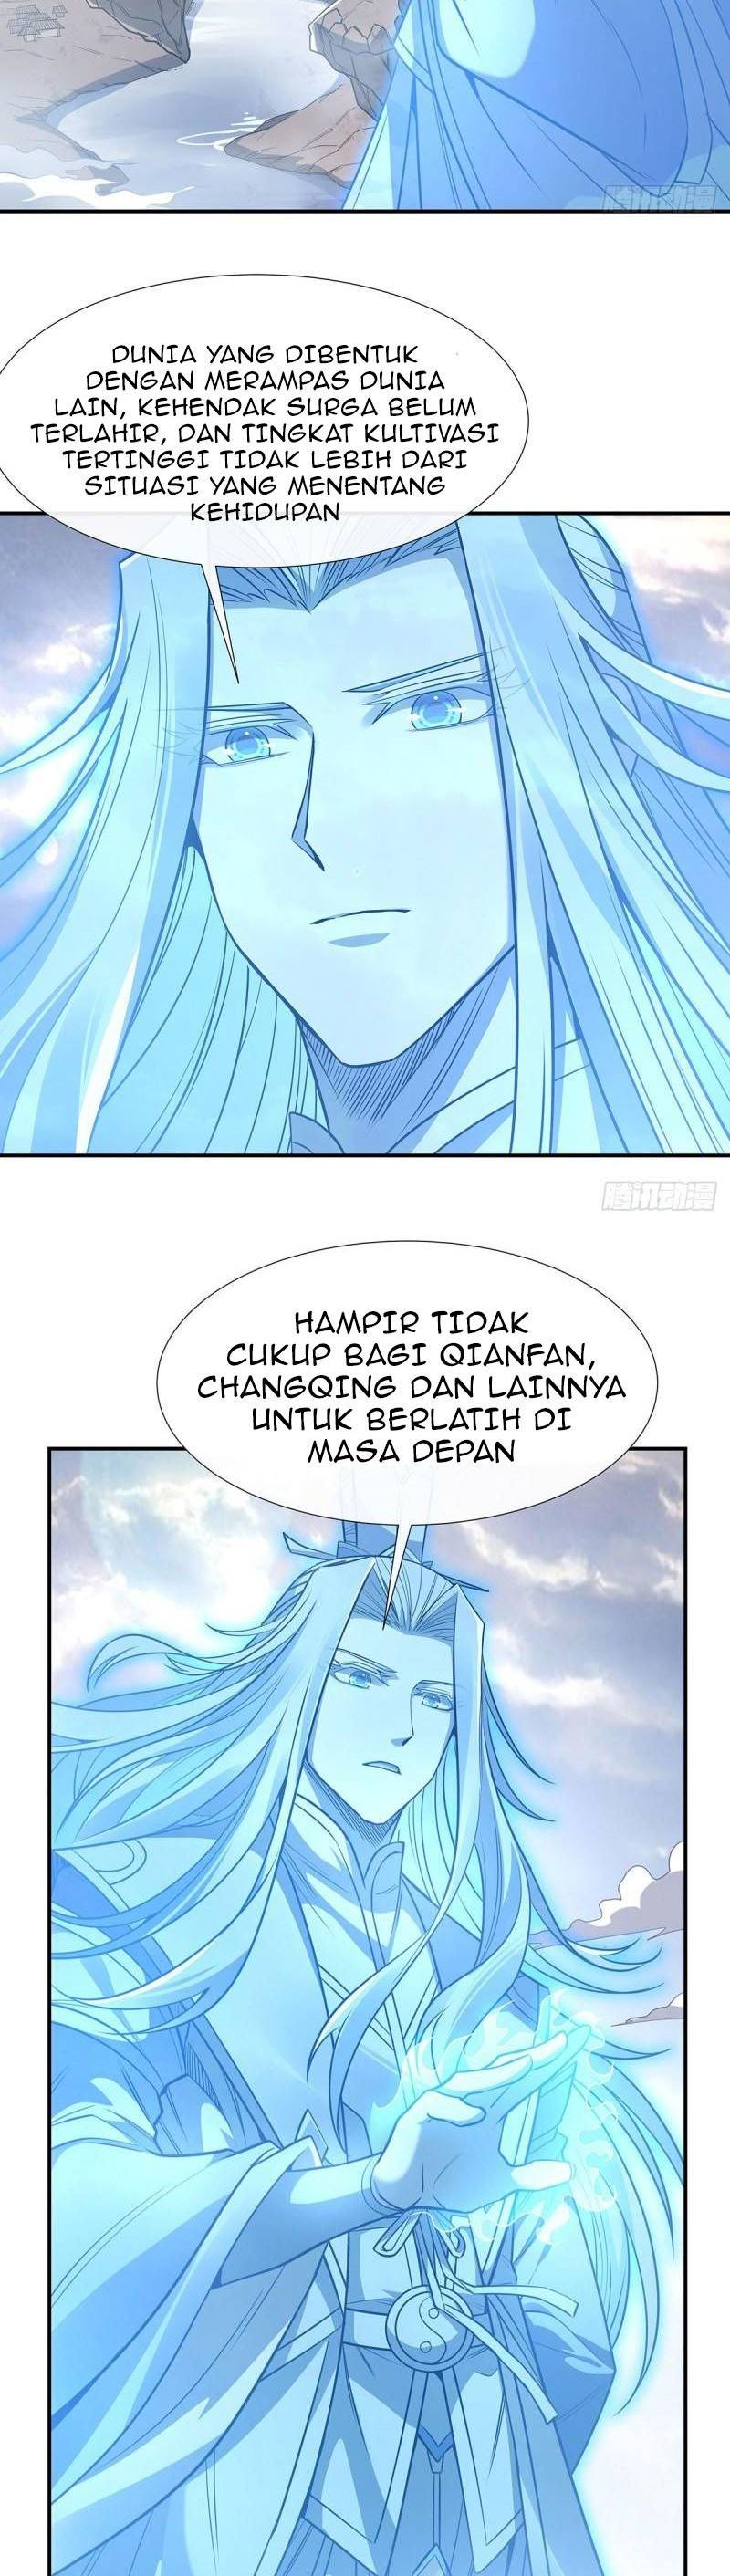 Dilarang COPAS - situs resmi www.mangacanblog.com - Komik my female apprentices are all big shots from the future 078 - chapter 78 79 Indonesia my female apprentices are all big shots from the future 078 - chapter 78 Terbaru 22|Baca Manga Komik Indonesia|Mangacan